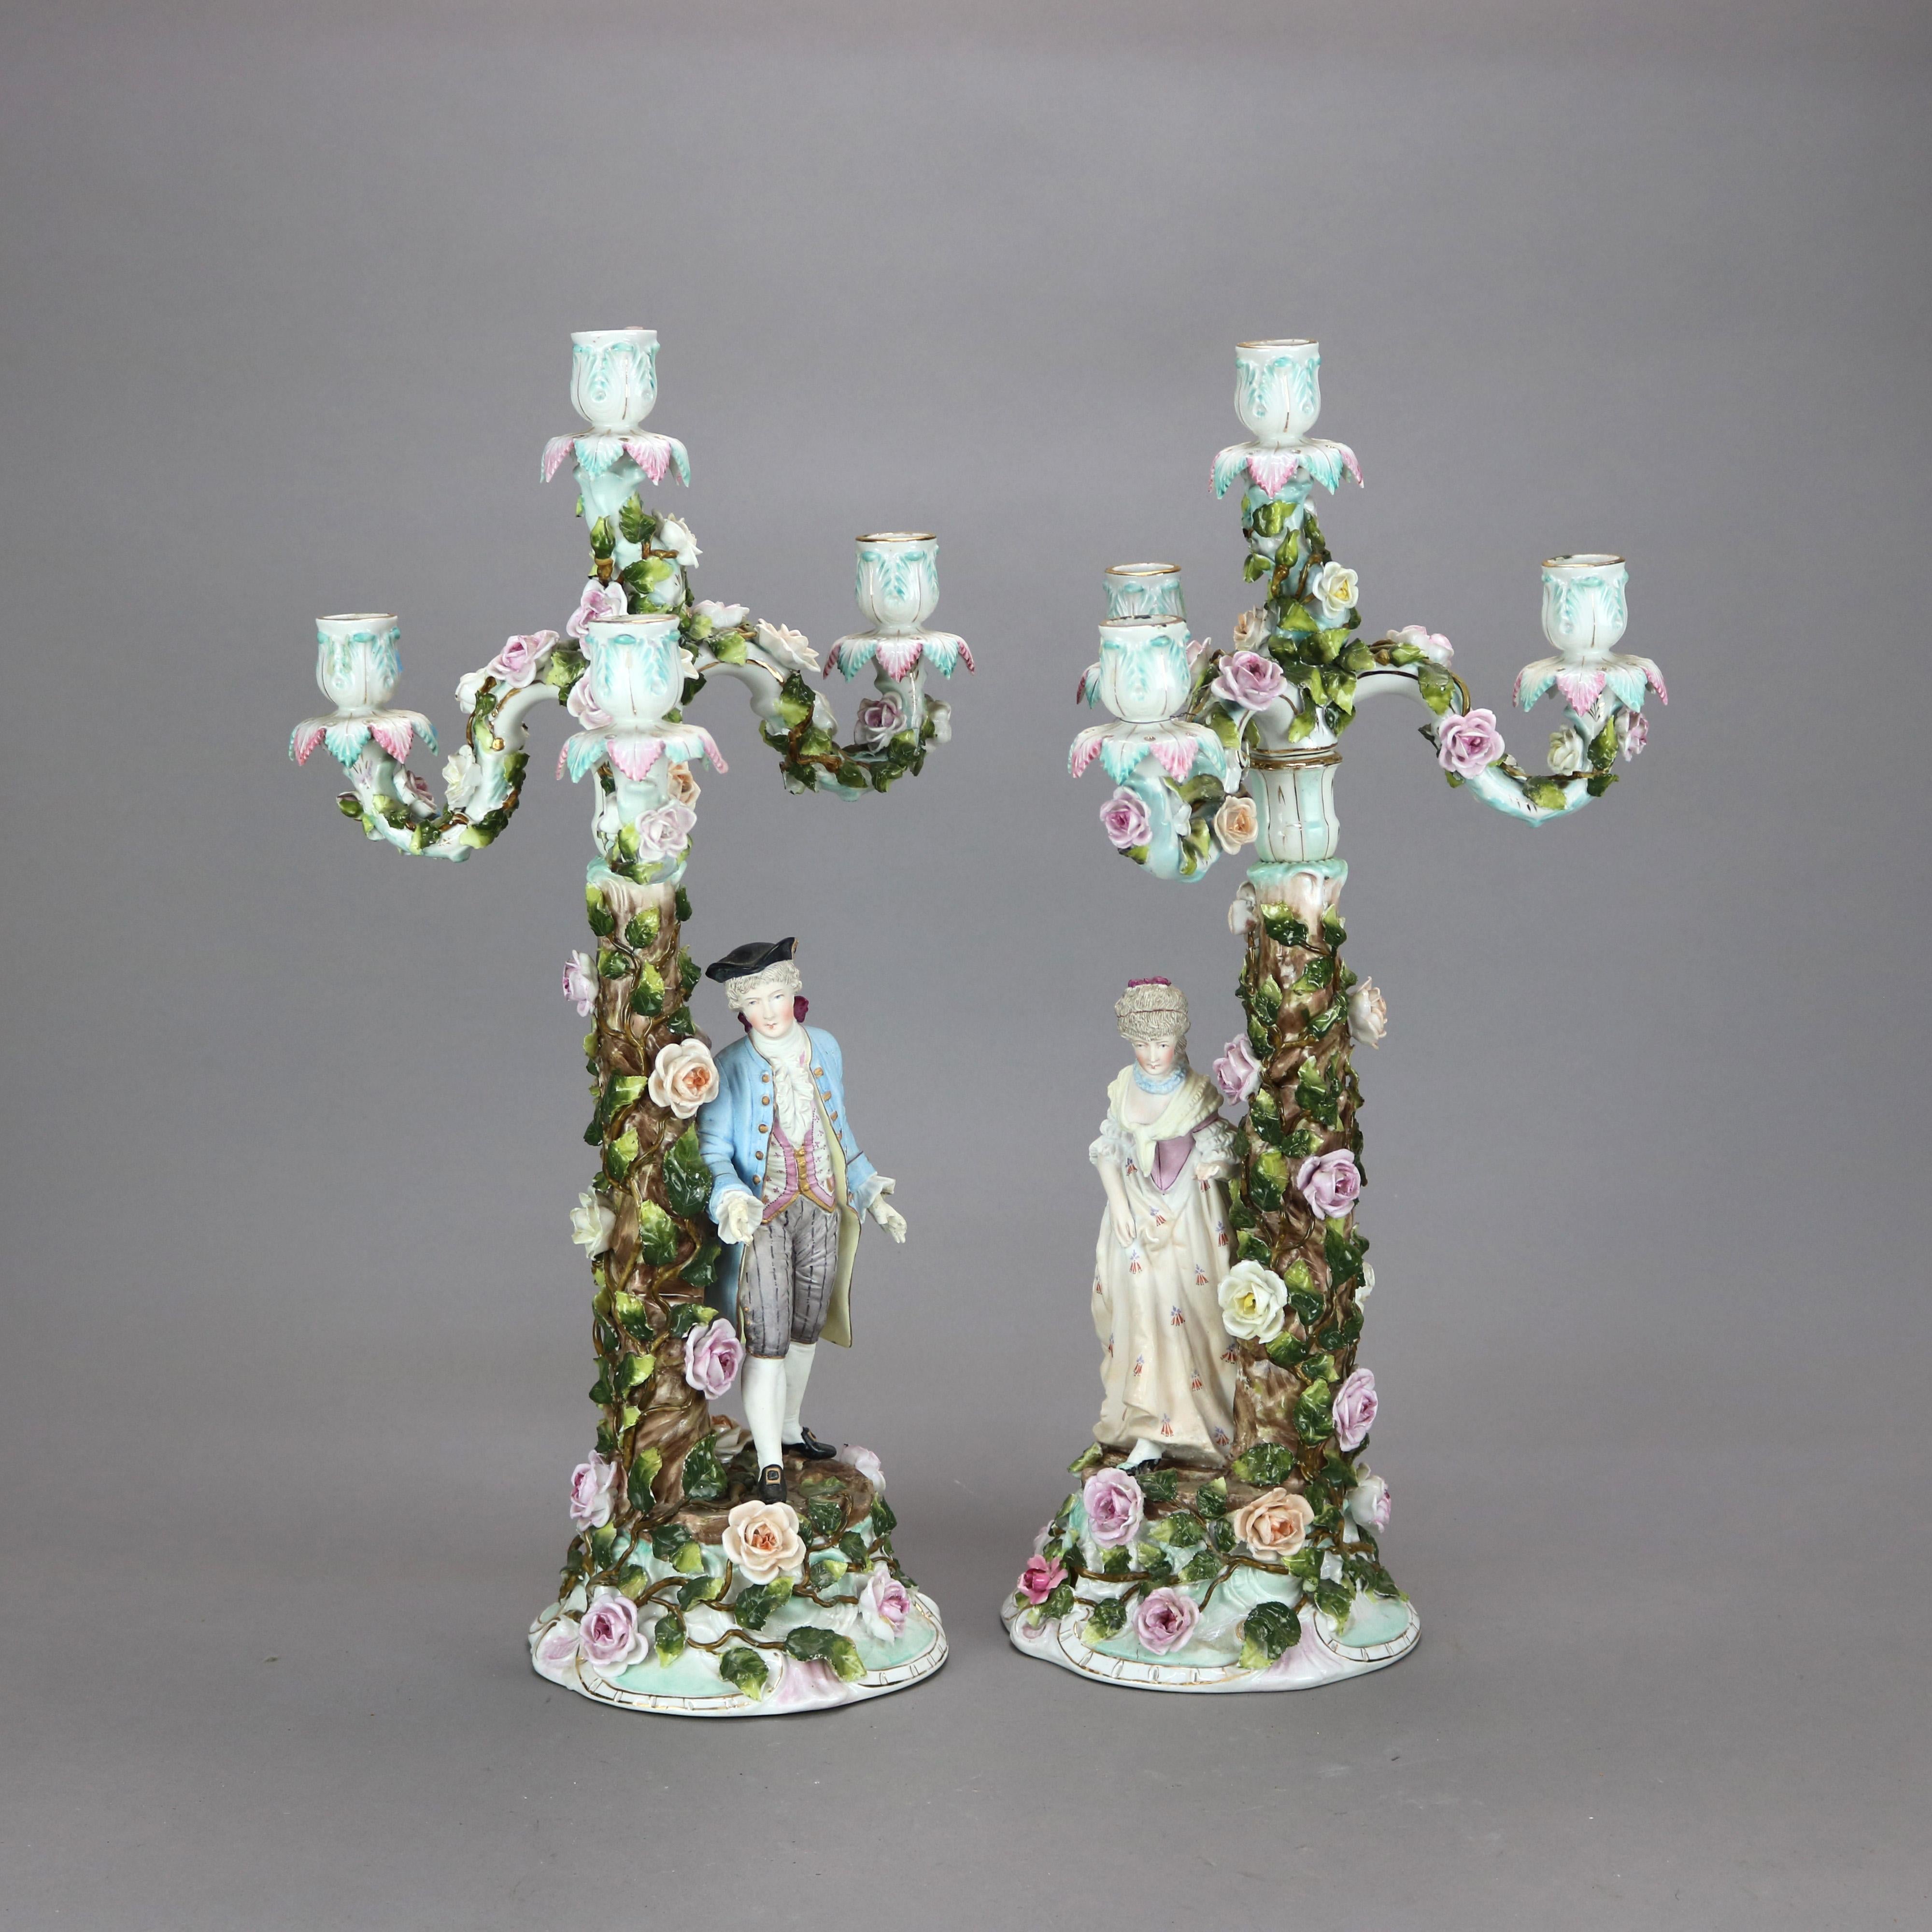 An antique pair of German figural candelabra in the manner of Meissen offer hand painted porcelain construction with man and woman in countryside setting and having three s-scroll arms terminating in candle sockets and surrounding central socket,